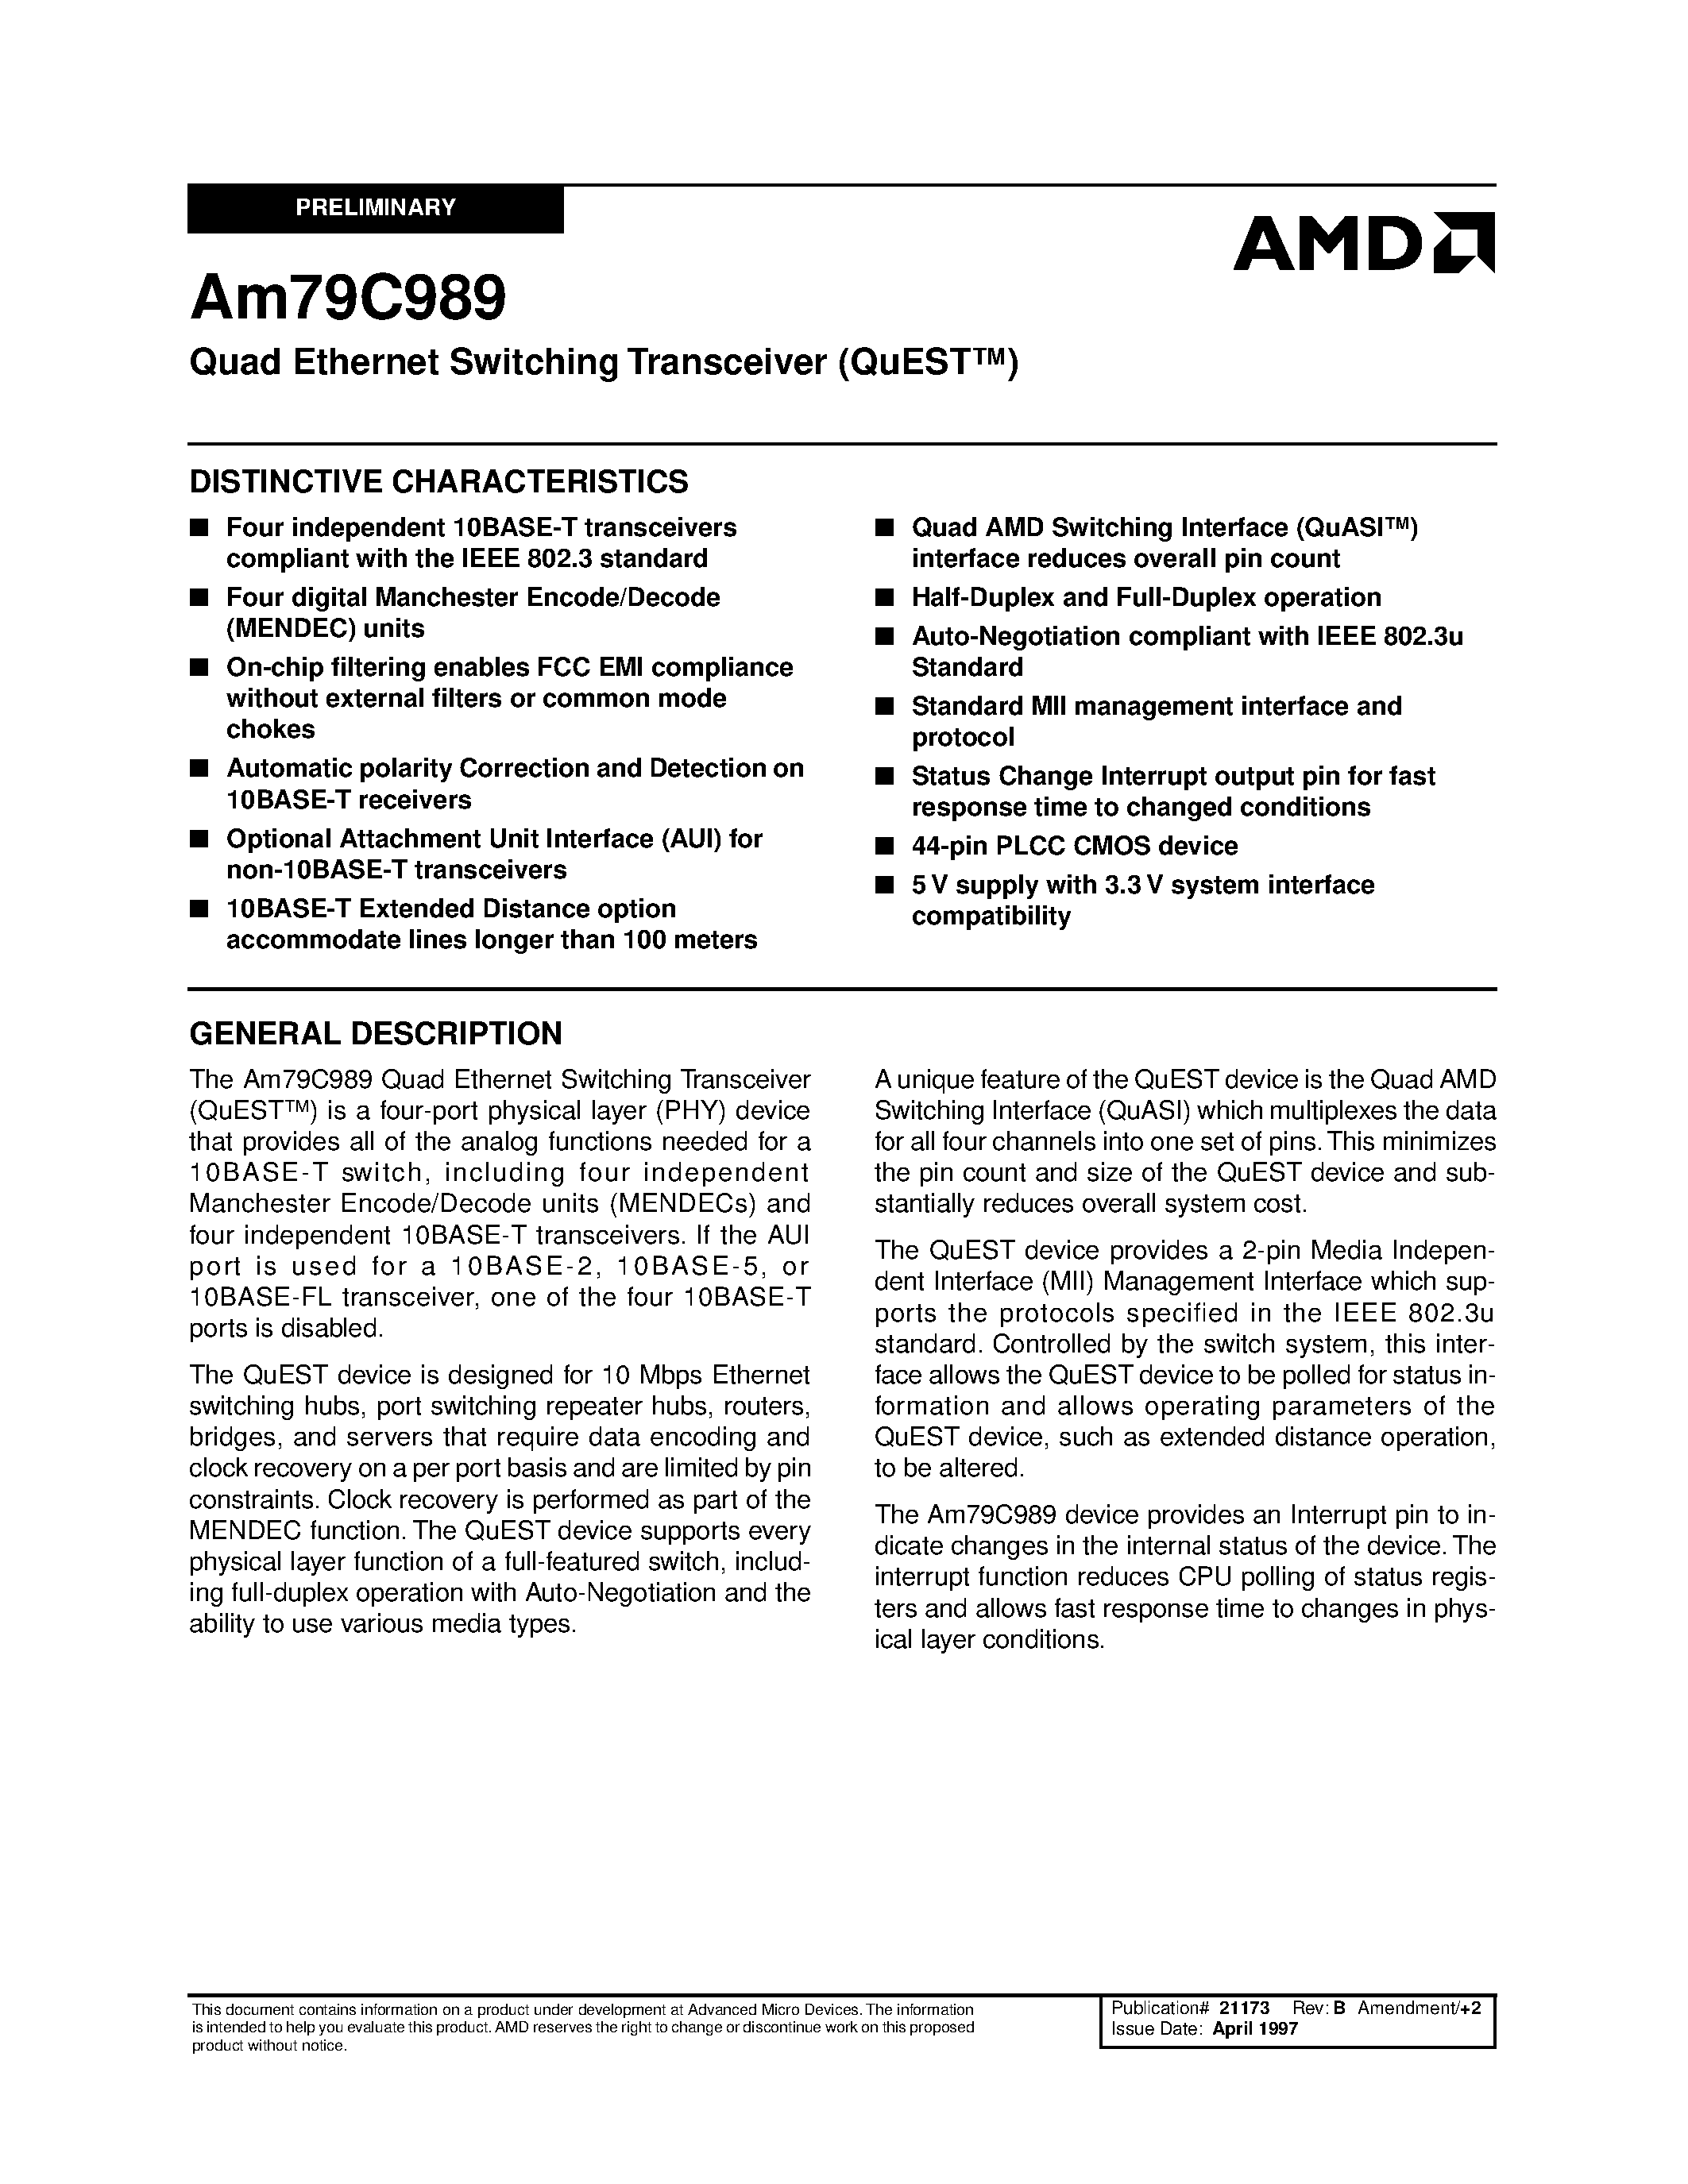 Datasheet AM79C989 - Quad Ethernet Switching Transceiver (QuEST) page 1